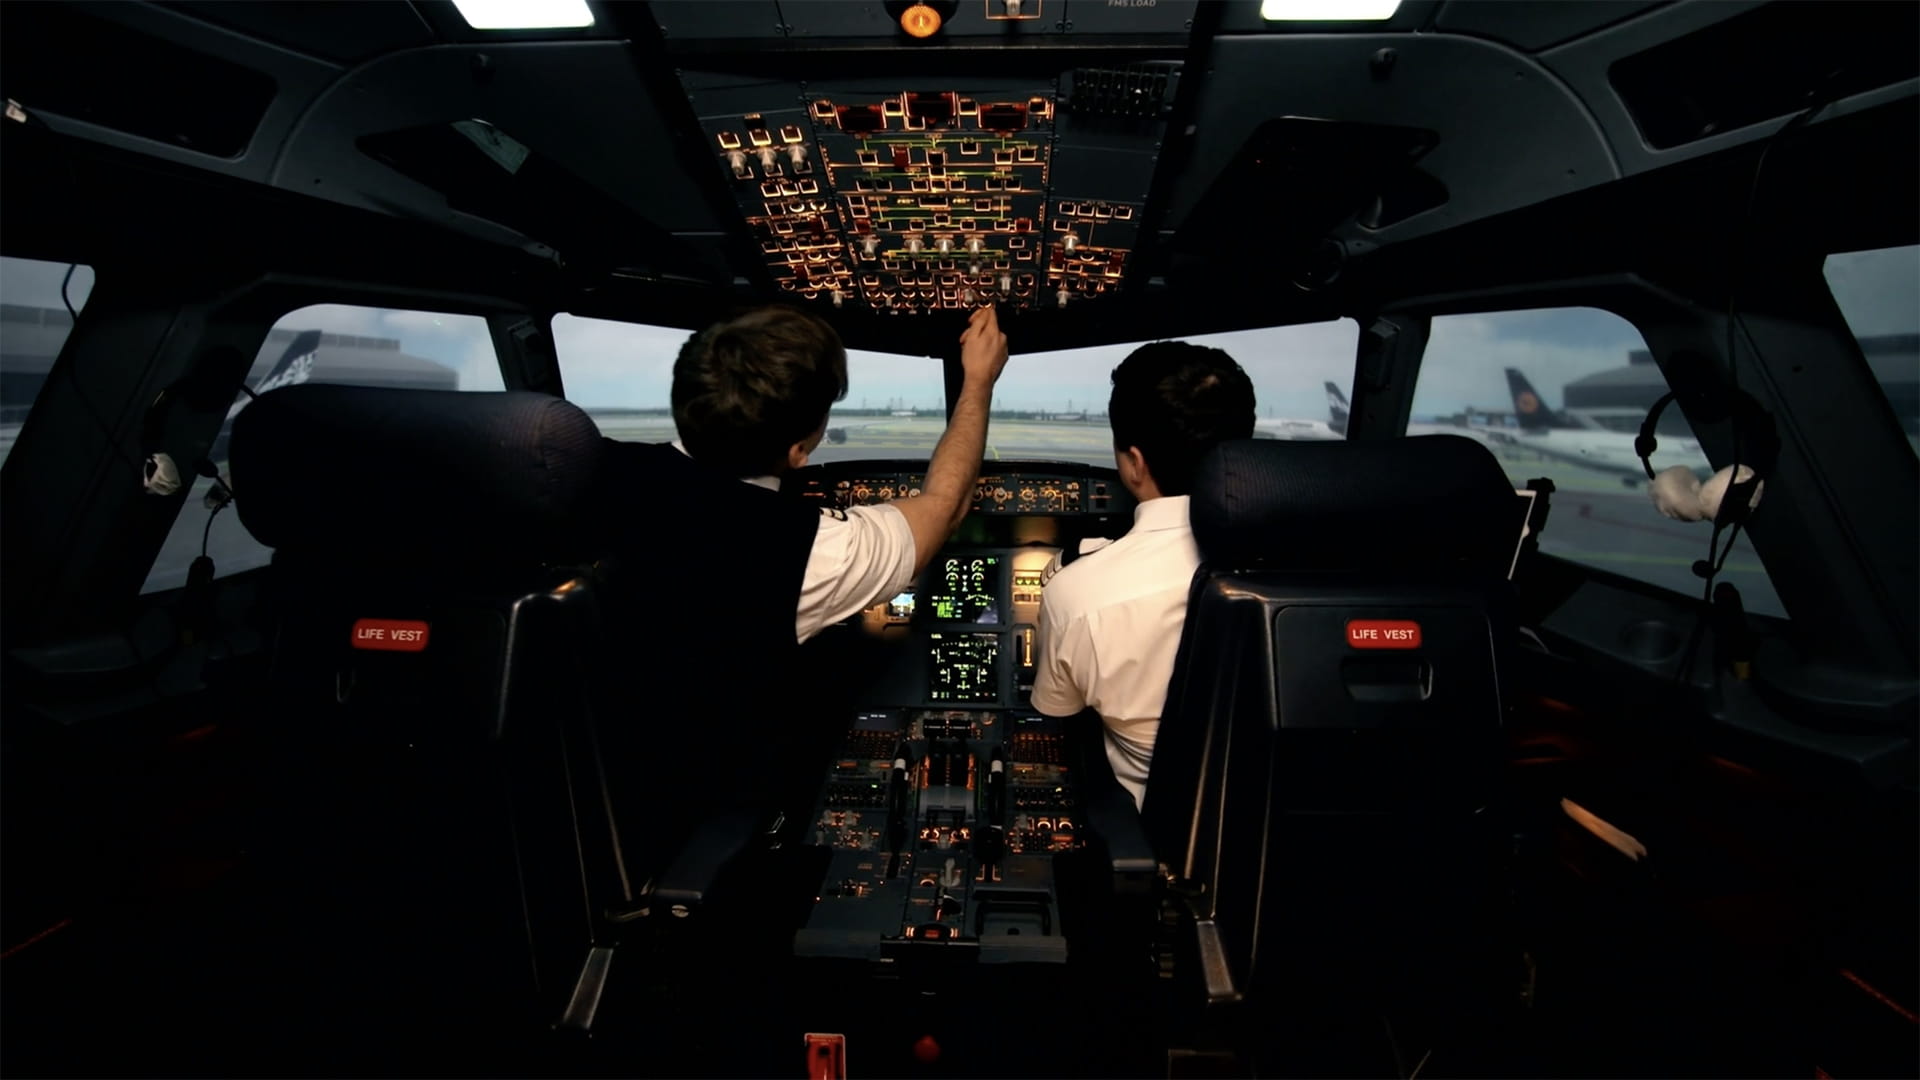 Two pilots in a commercial aircraft flight deck